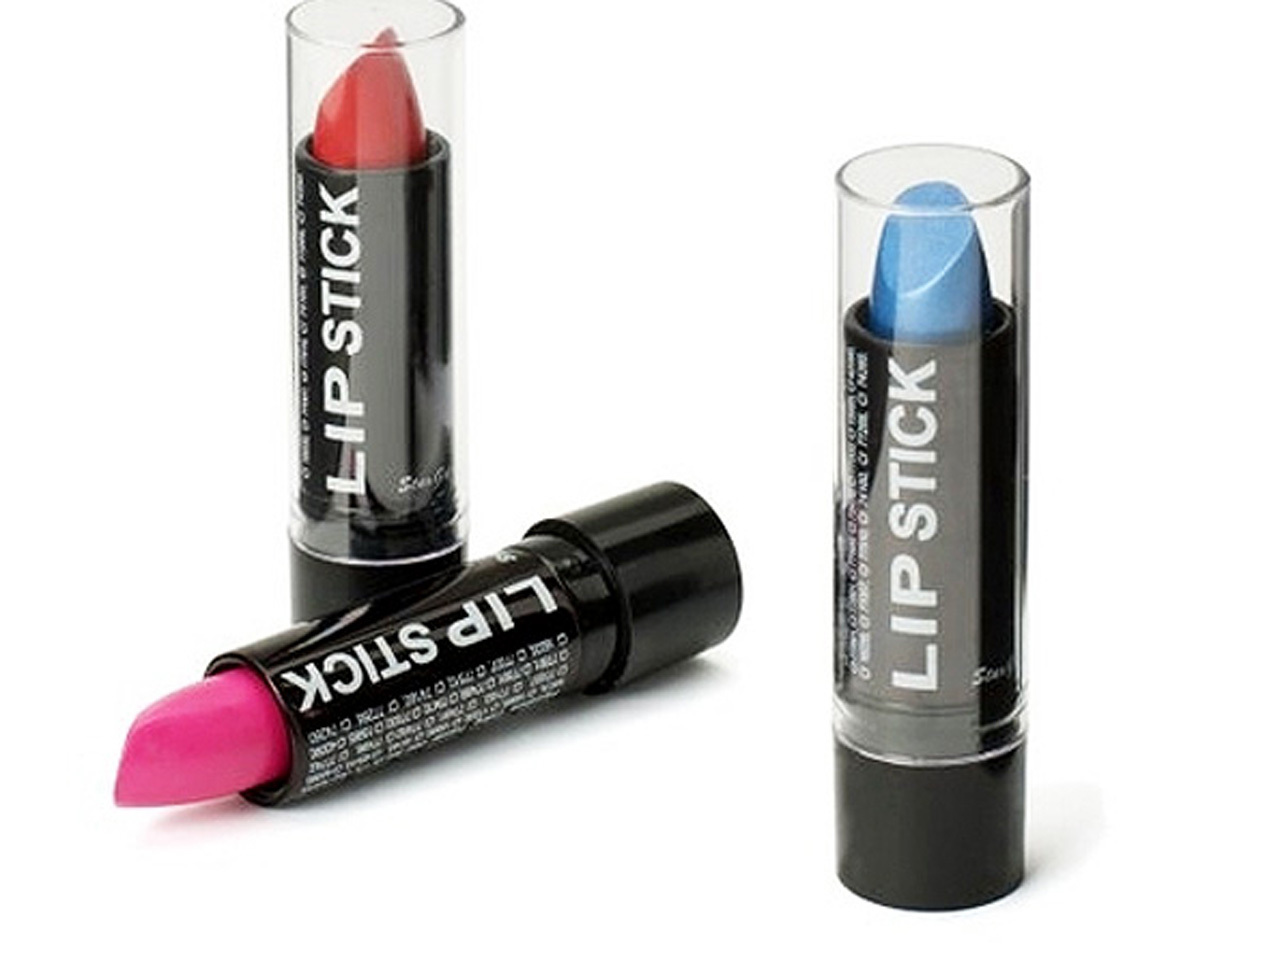 Toxic metals and cancer risks found in lipsticks, lip glosses - CBS News1280 x 960